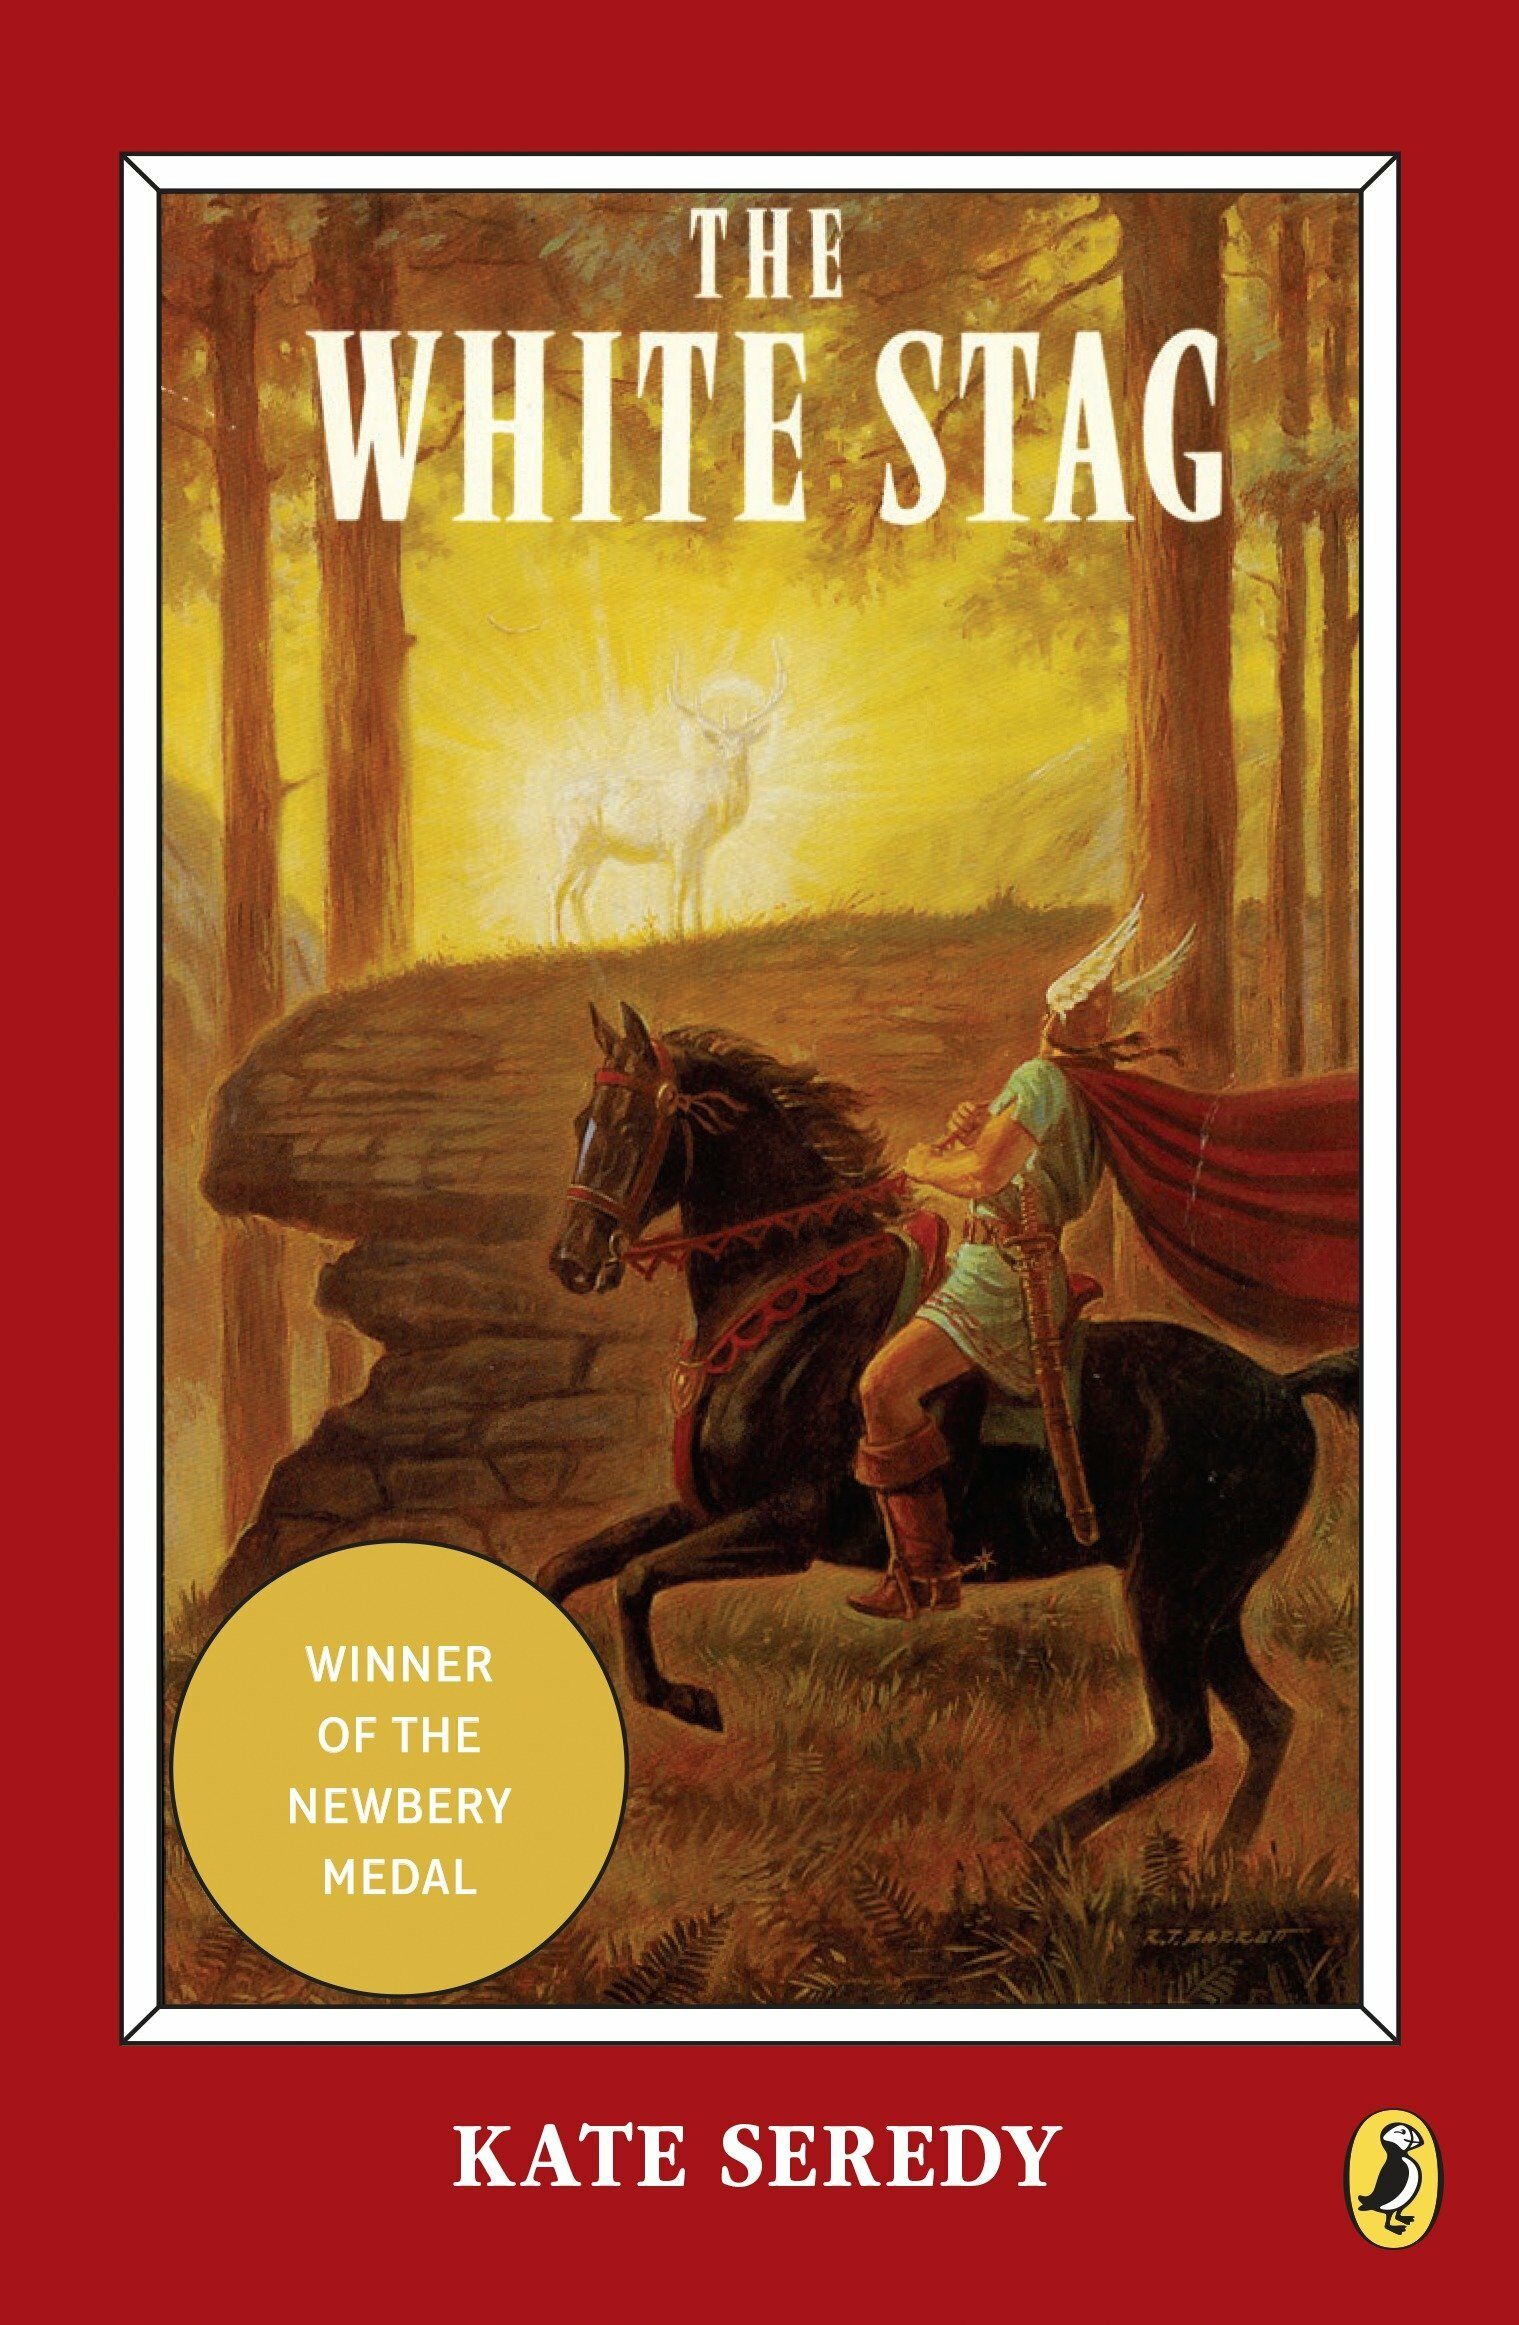 The White Stag (Paperback)